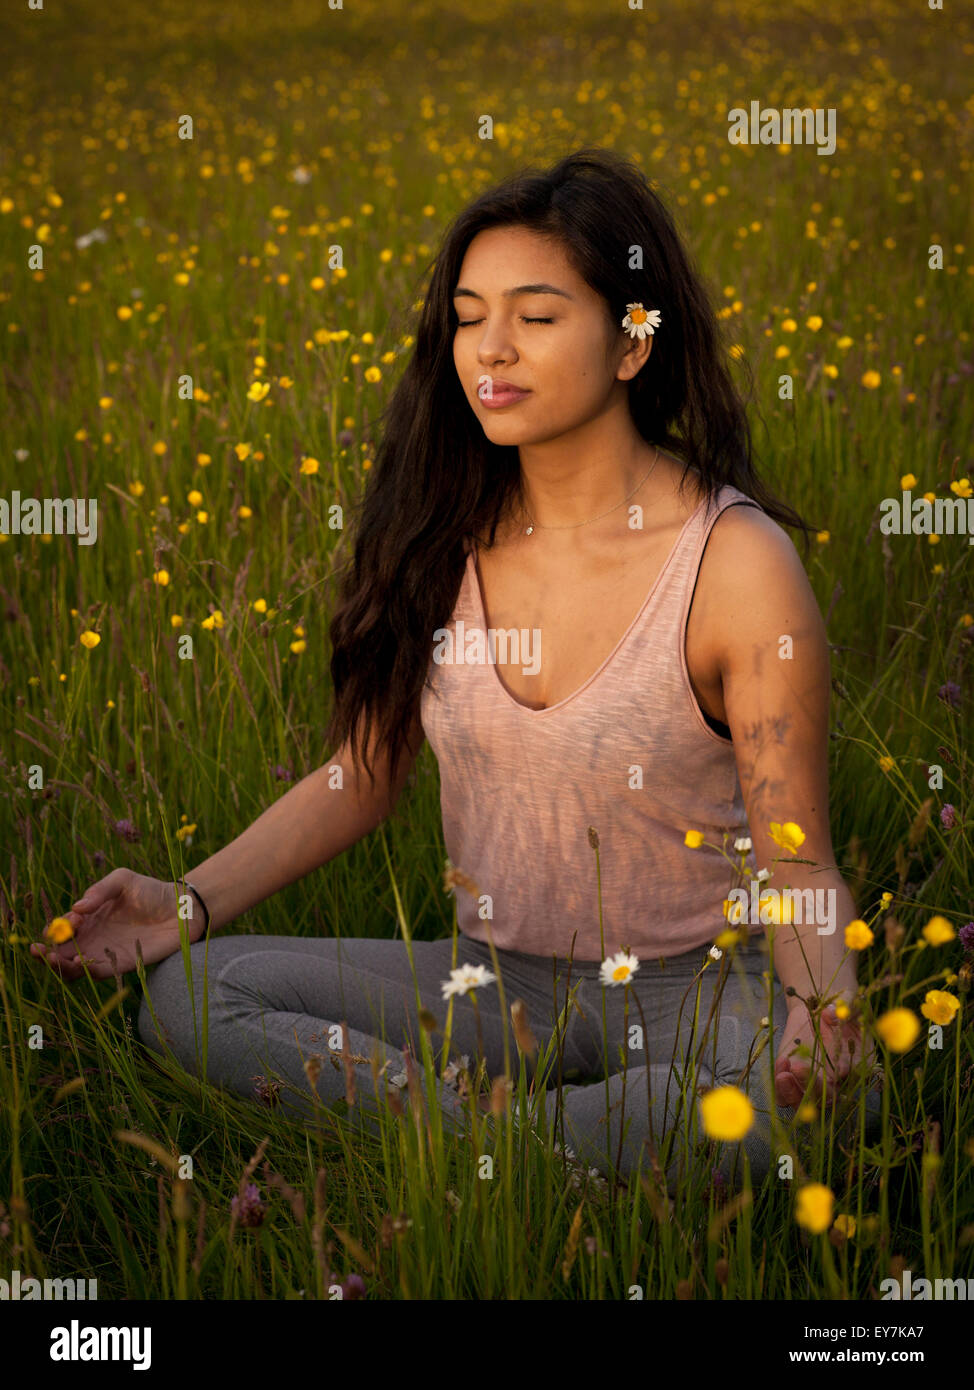 Girl in a wild flower meadow Banque D'Images